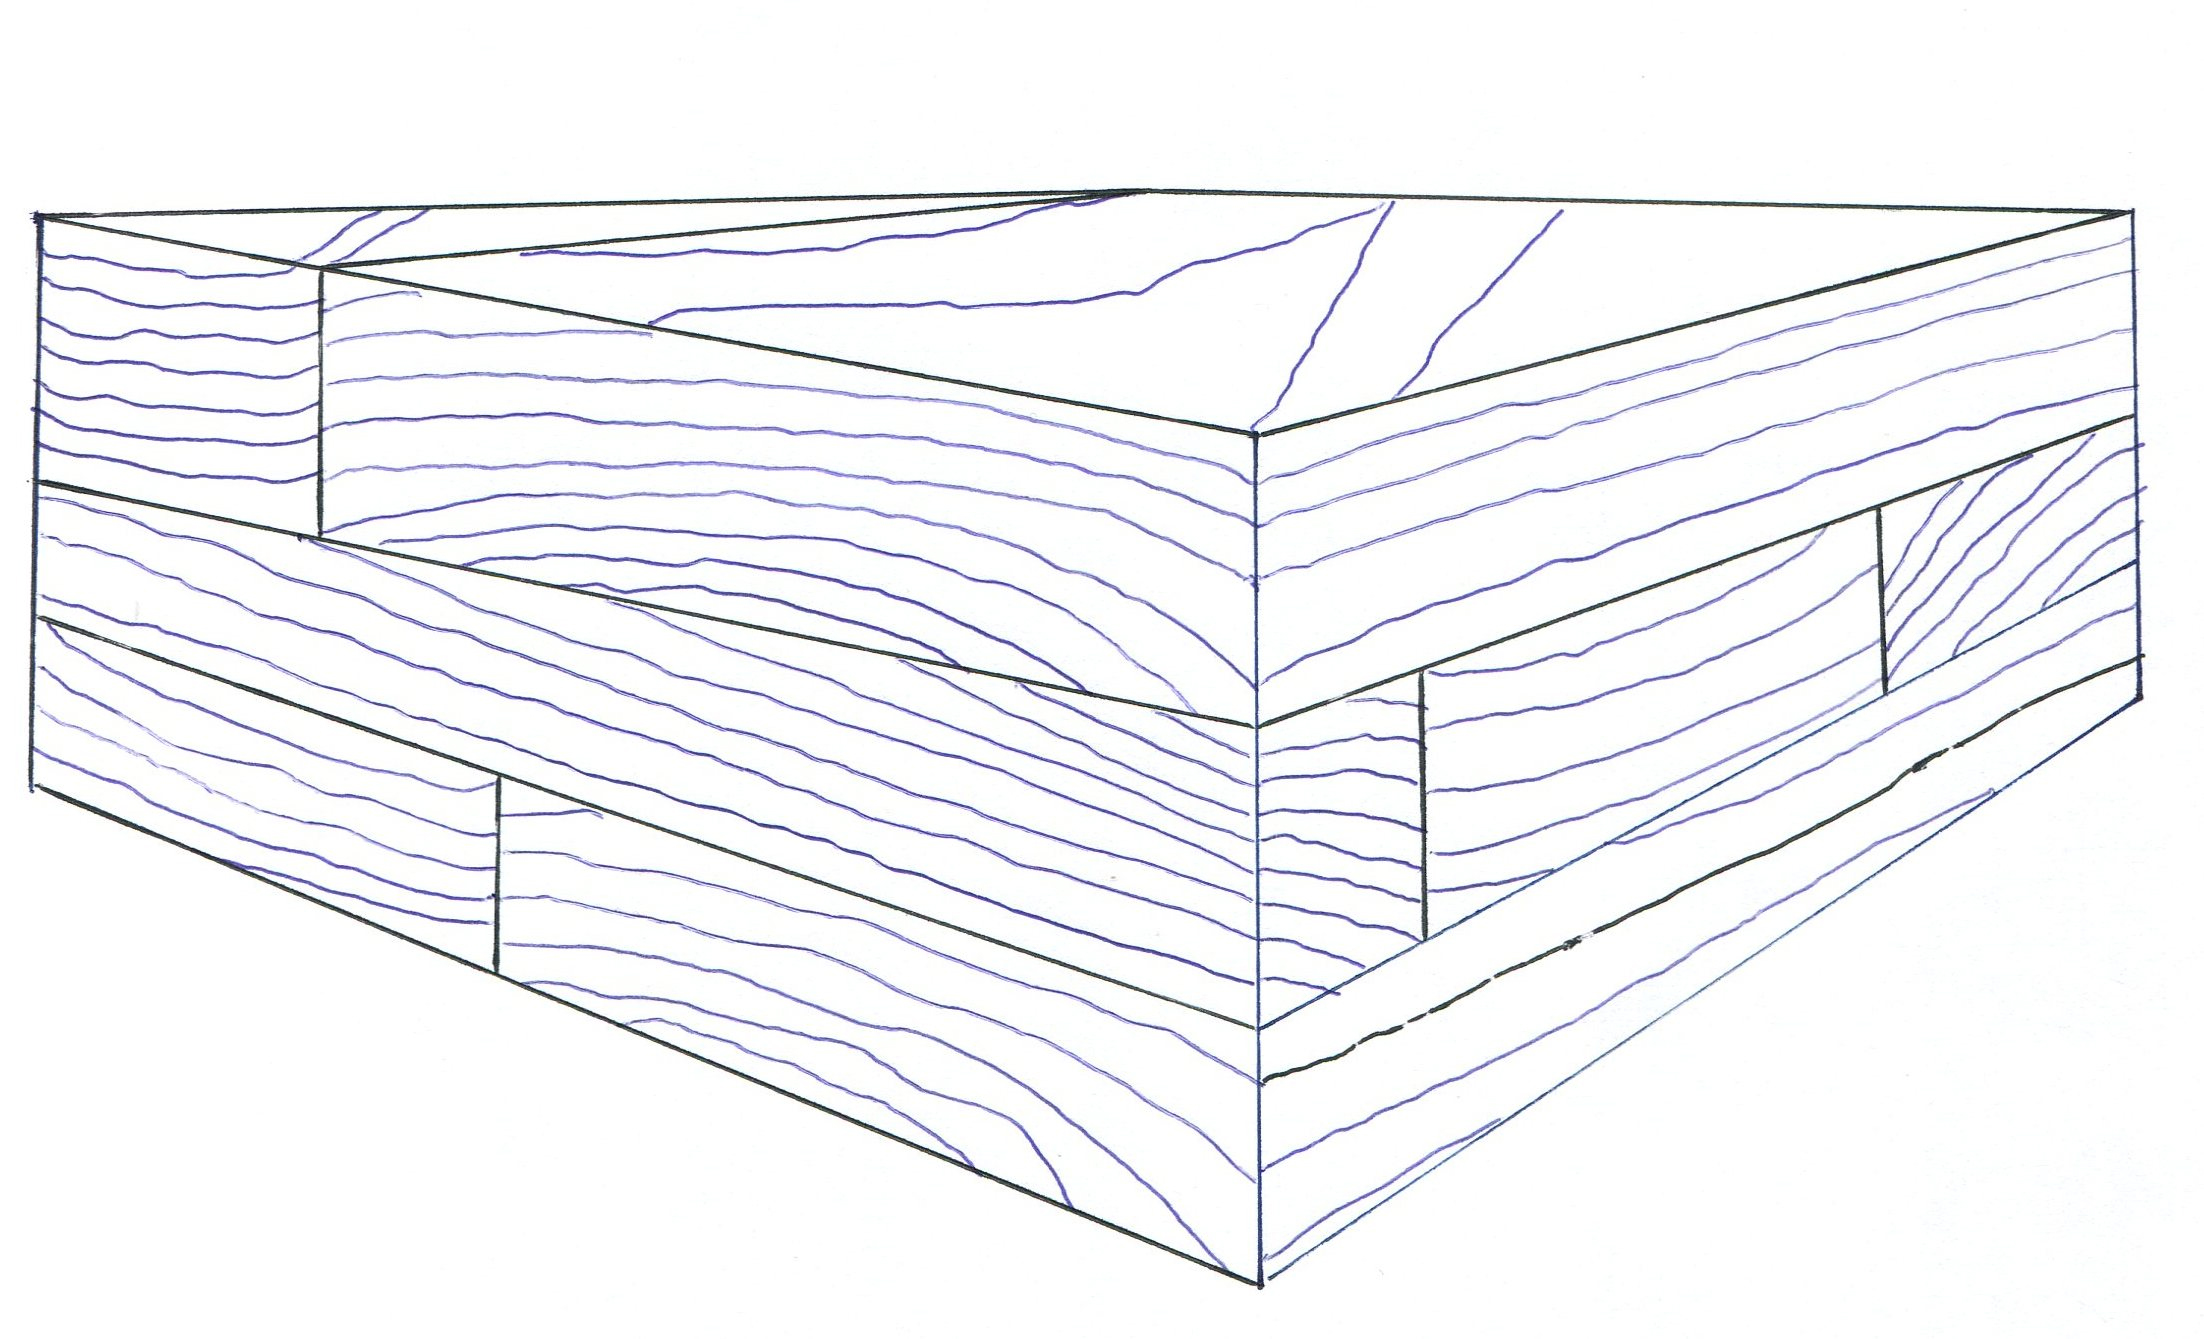 Typical cross laminated timber drawing.